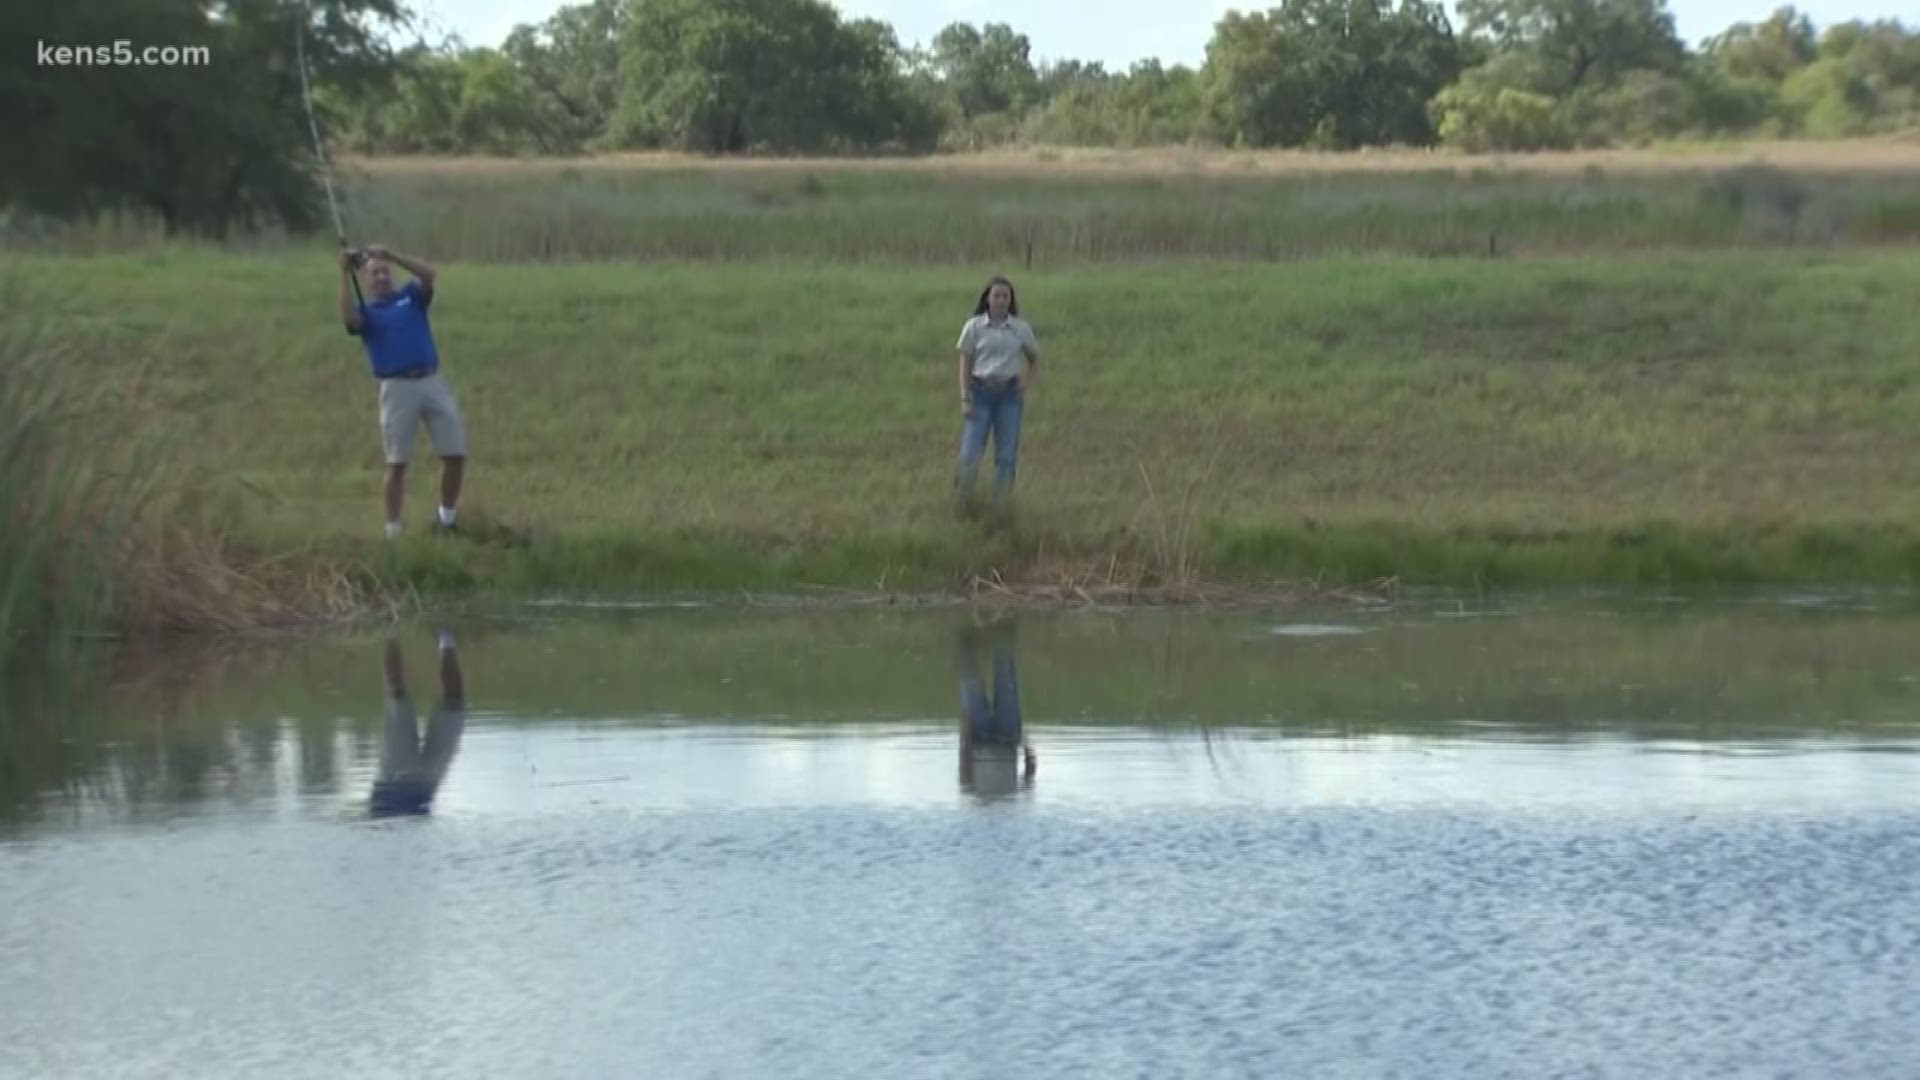 A chance to go fishing with the Texas Brigades? Alright, we'll take the bait!